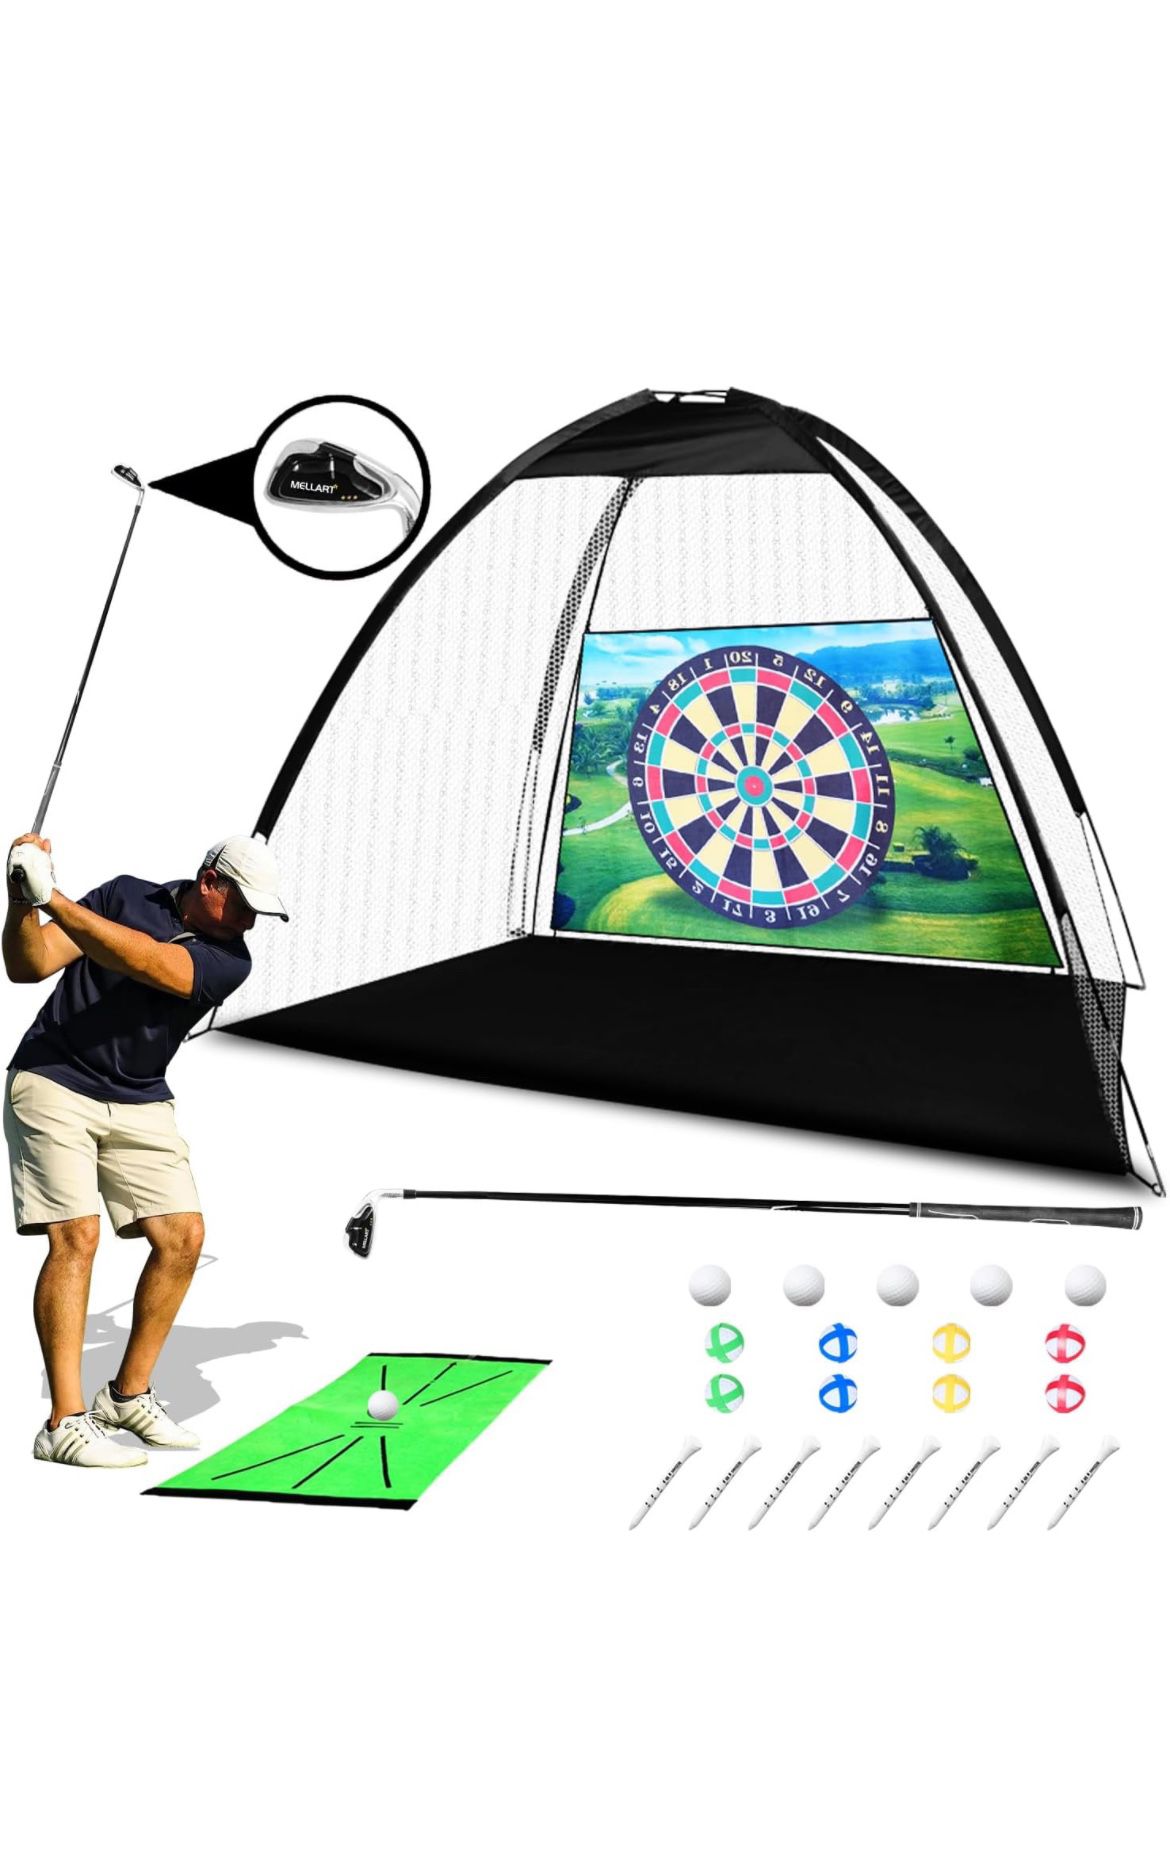 Golf Net Set, 10 x 7ft Golf Hitting Nets for Backyard Driving, Includes Clubs, Indoor/Outdoor Golf Chipping/Swing Practice Nets with Targets and Mats,